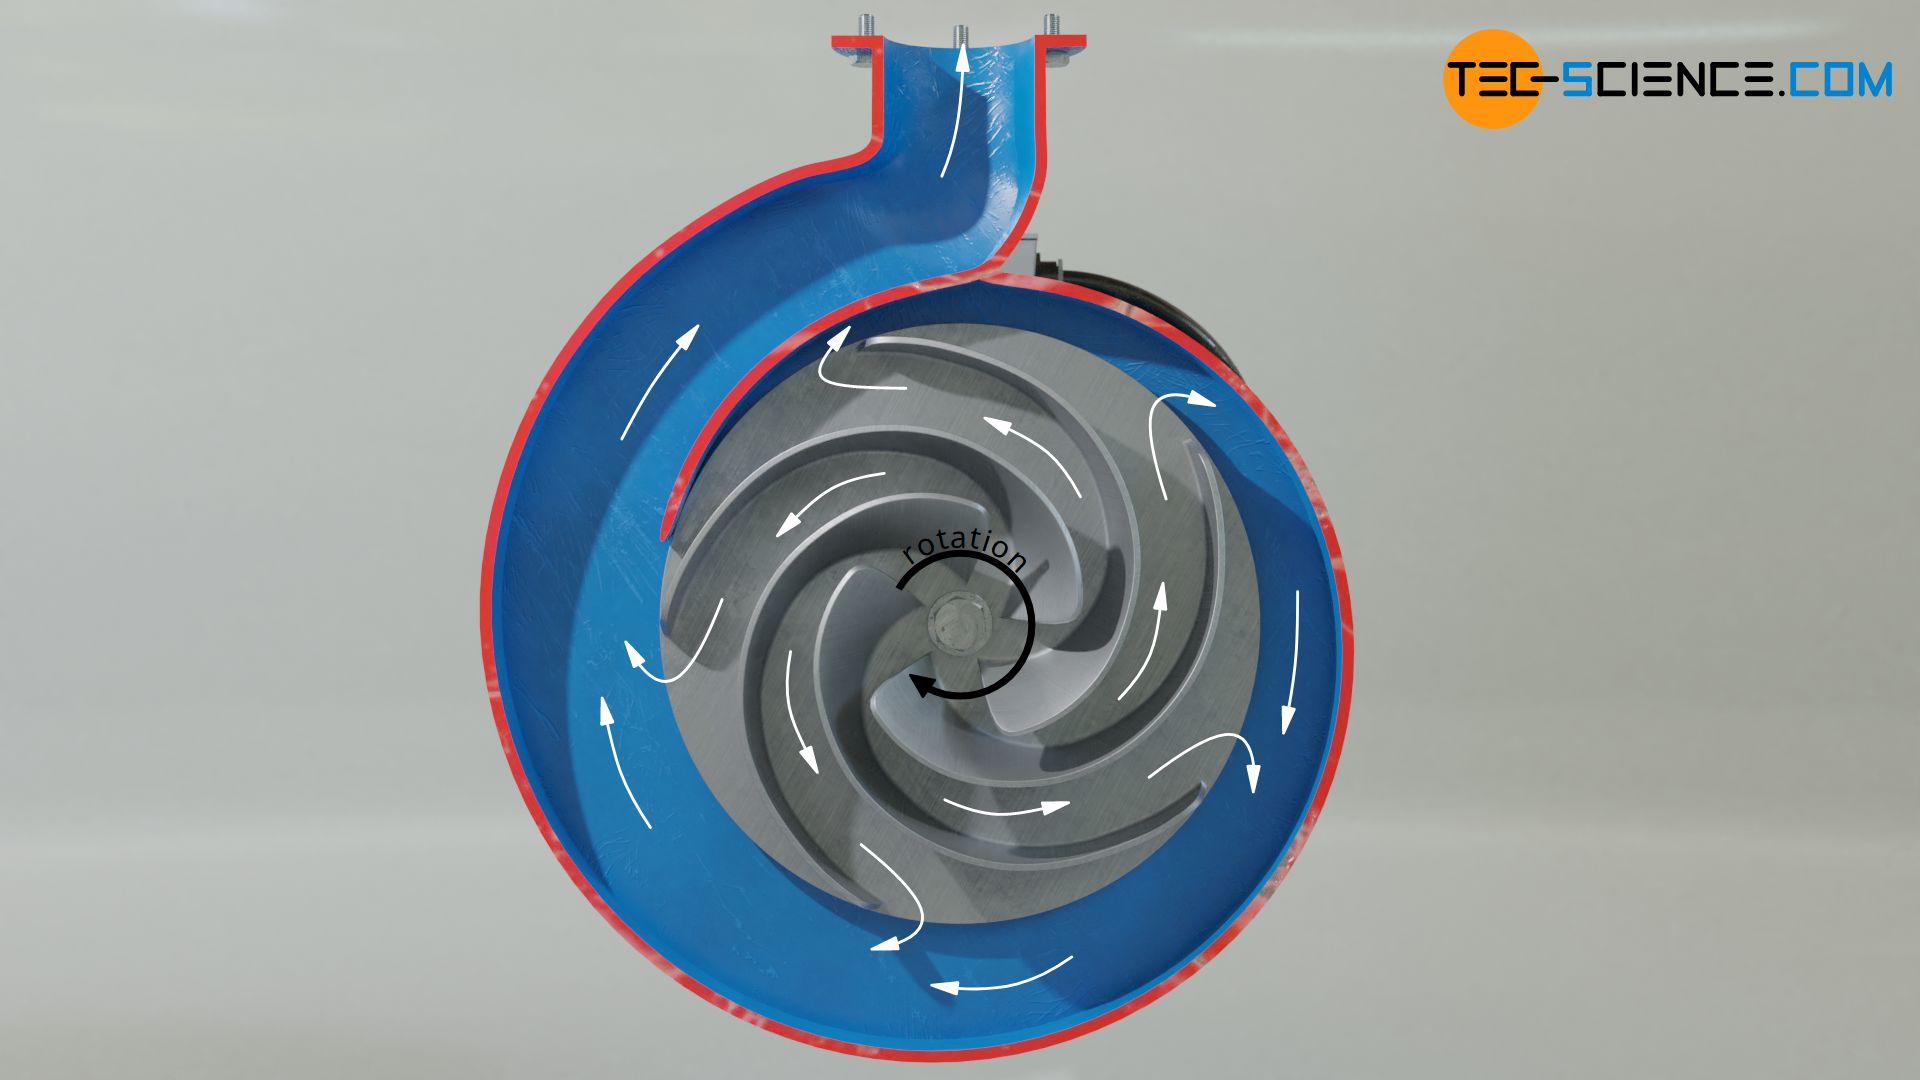 Impeller of a centrifugal pump